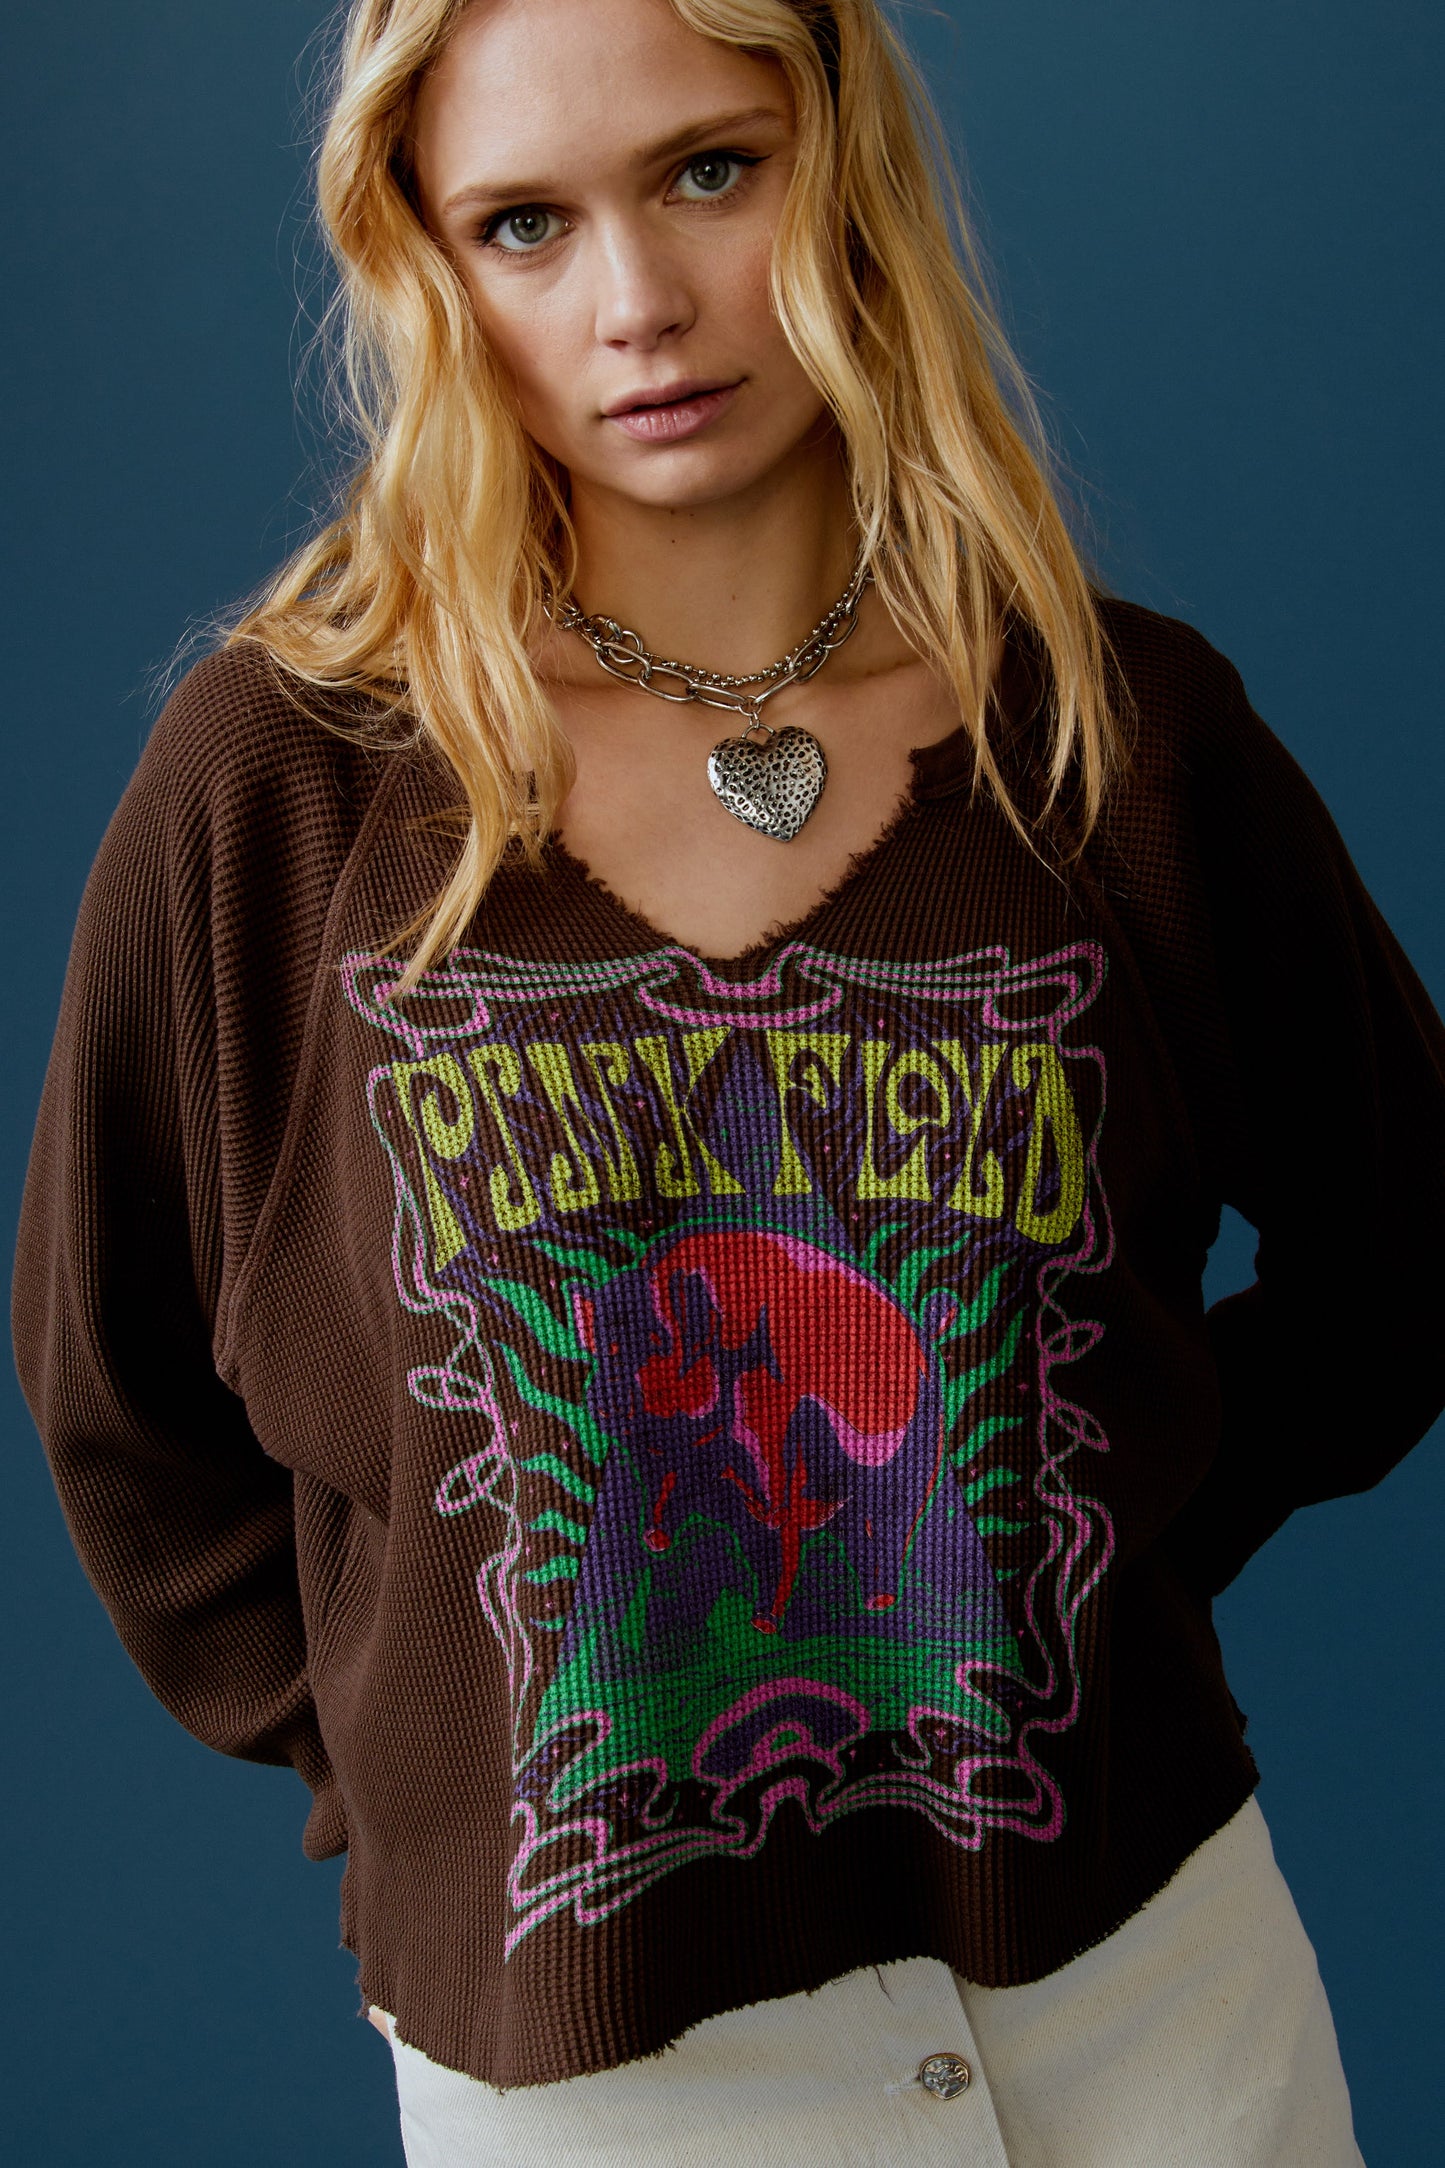 A blonde-haired model featuring a brown long sleeve stamped with 'Pink Floyd' in yellow font and a graphic of a cosmic pyramid.